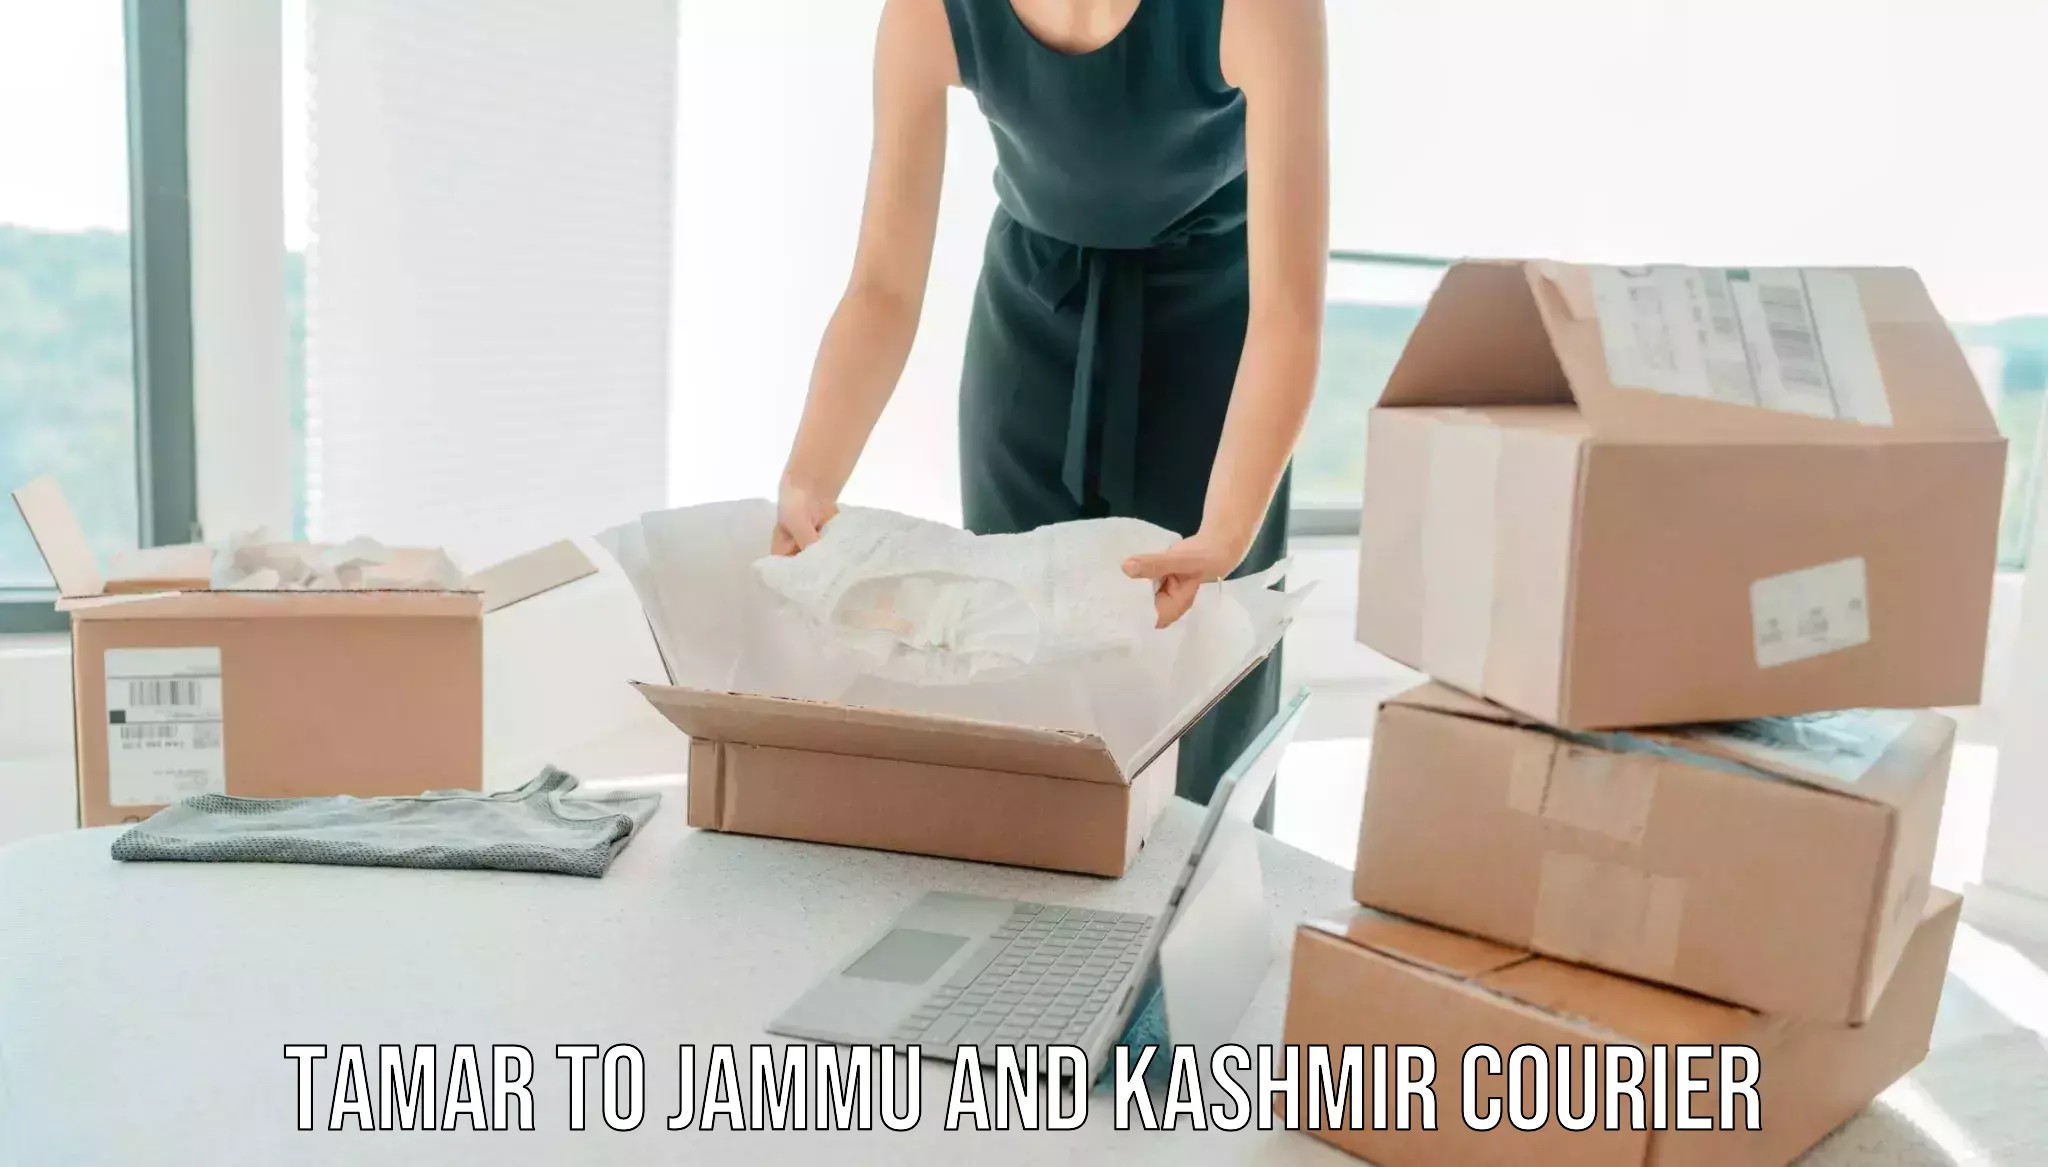 Trusted relocation experts Tamar to University of Jammu